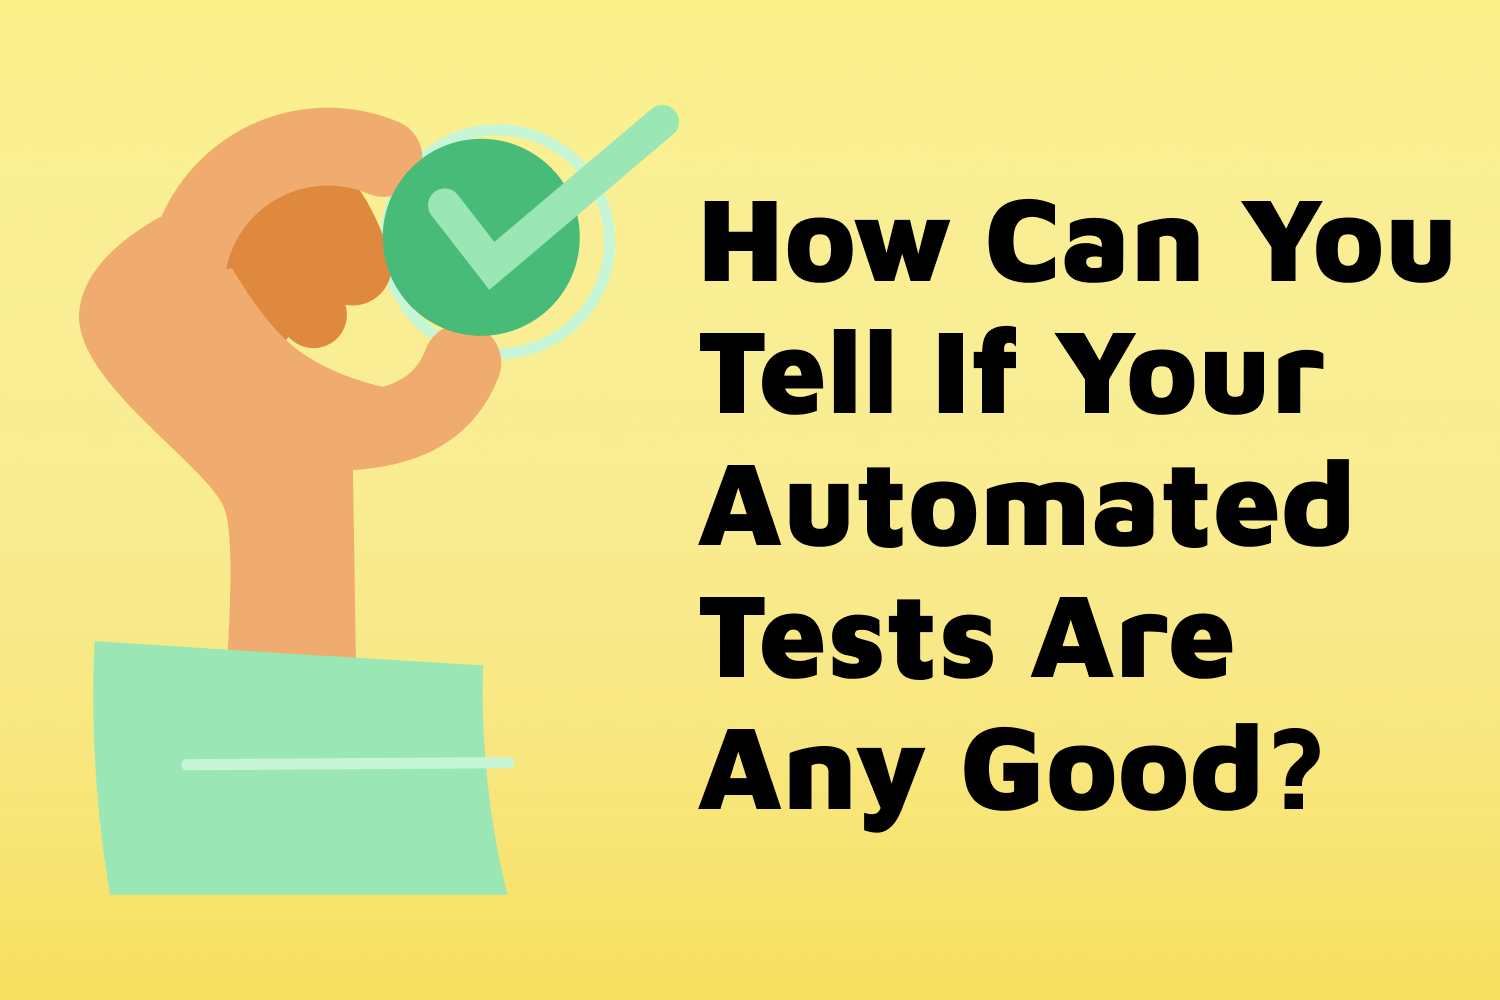 How Can You Tell If Your Automated Tests Are Any Good?